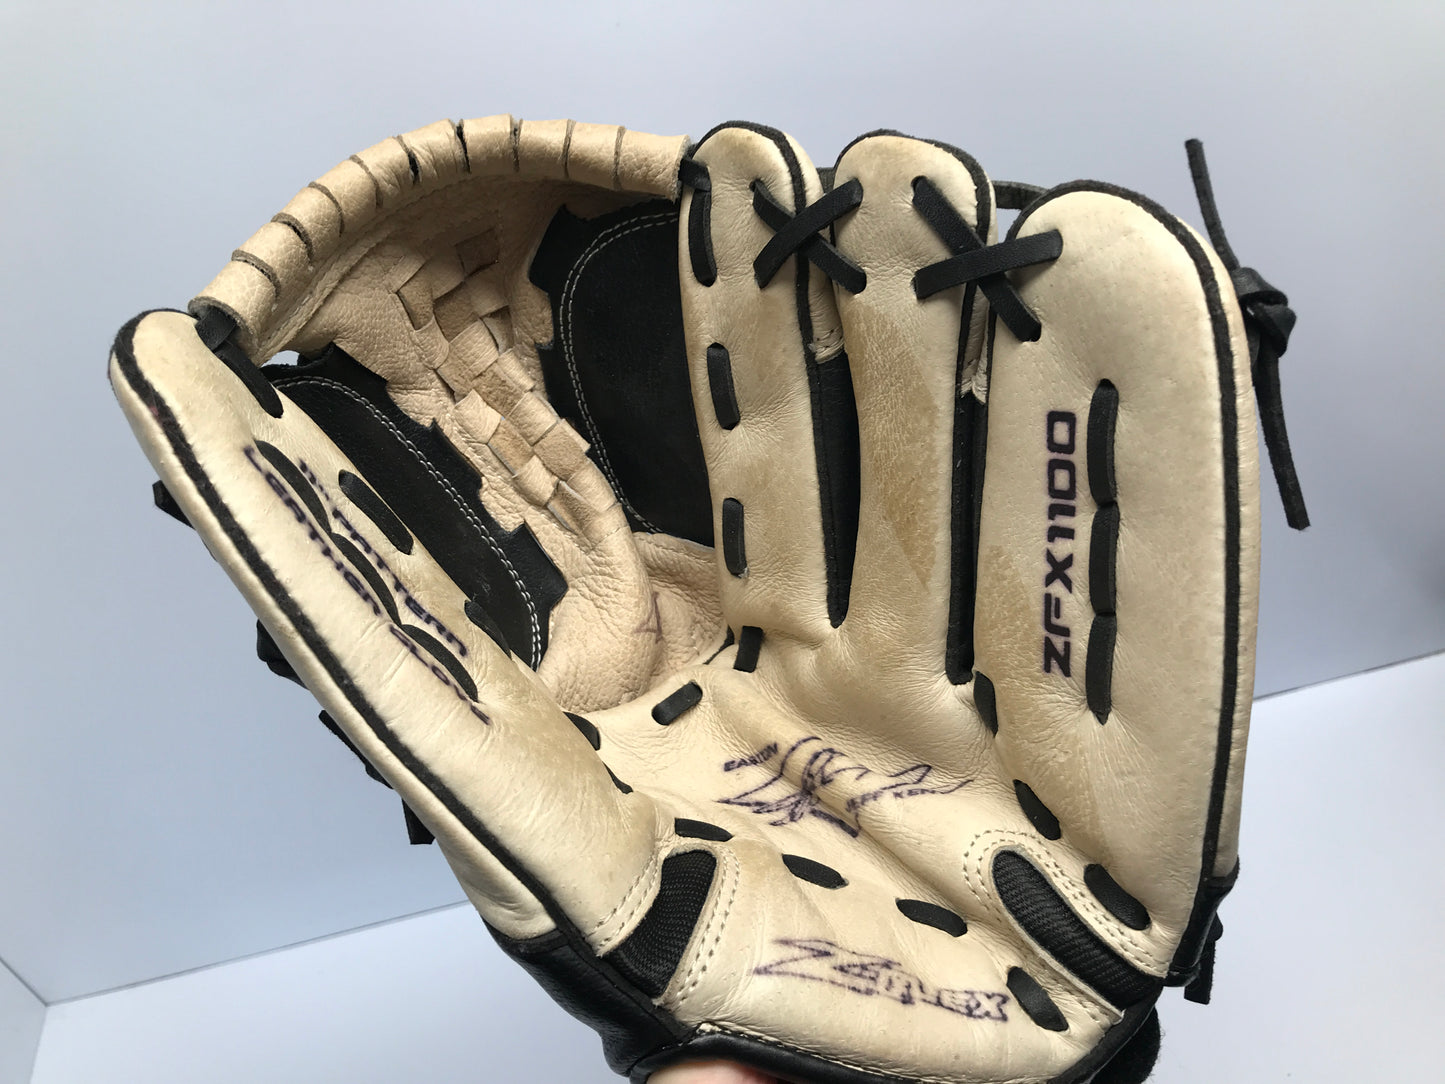 Baseball Glove 11 inch Junior Easton Leather Tan and Black Fits on Left Hand Like New